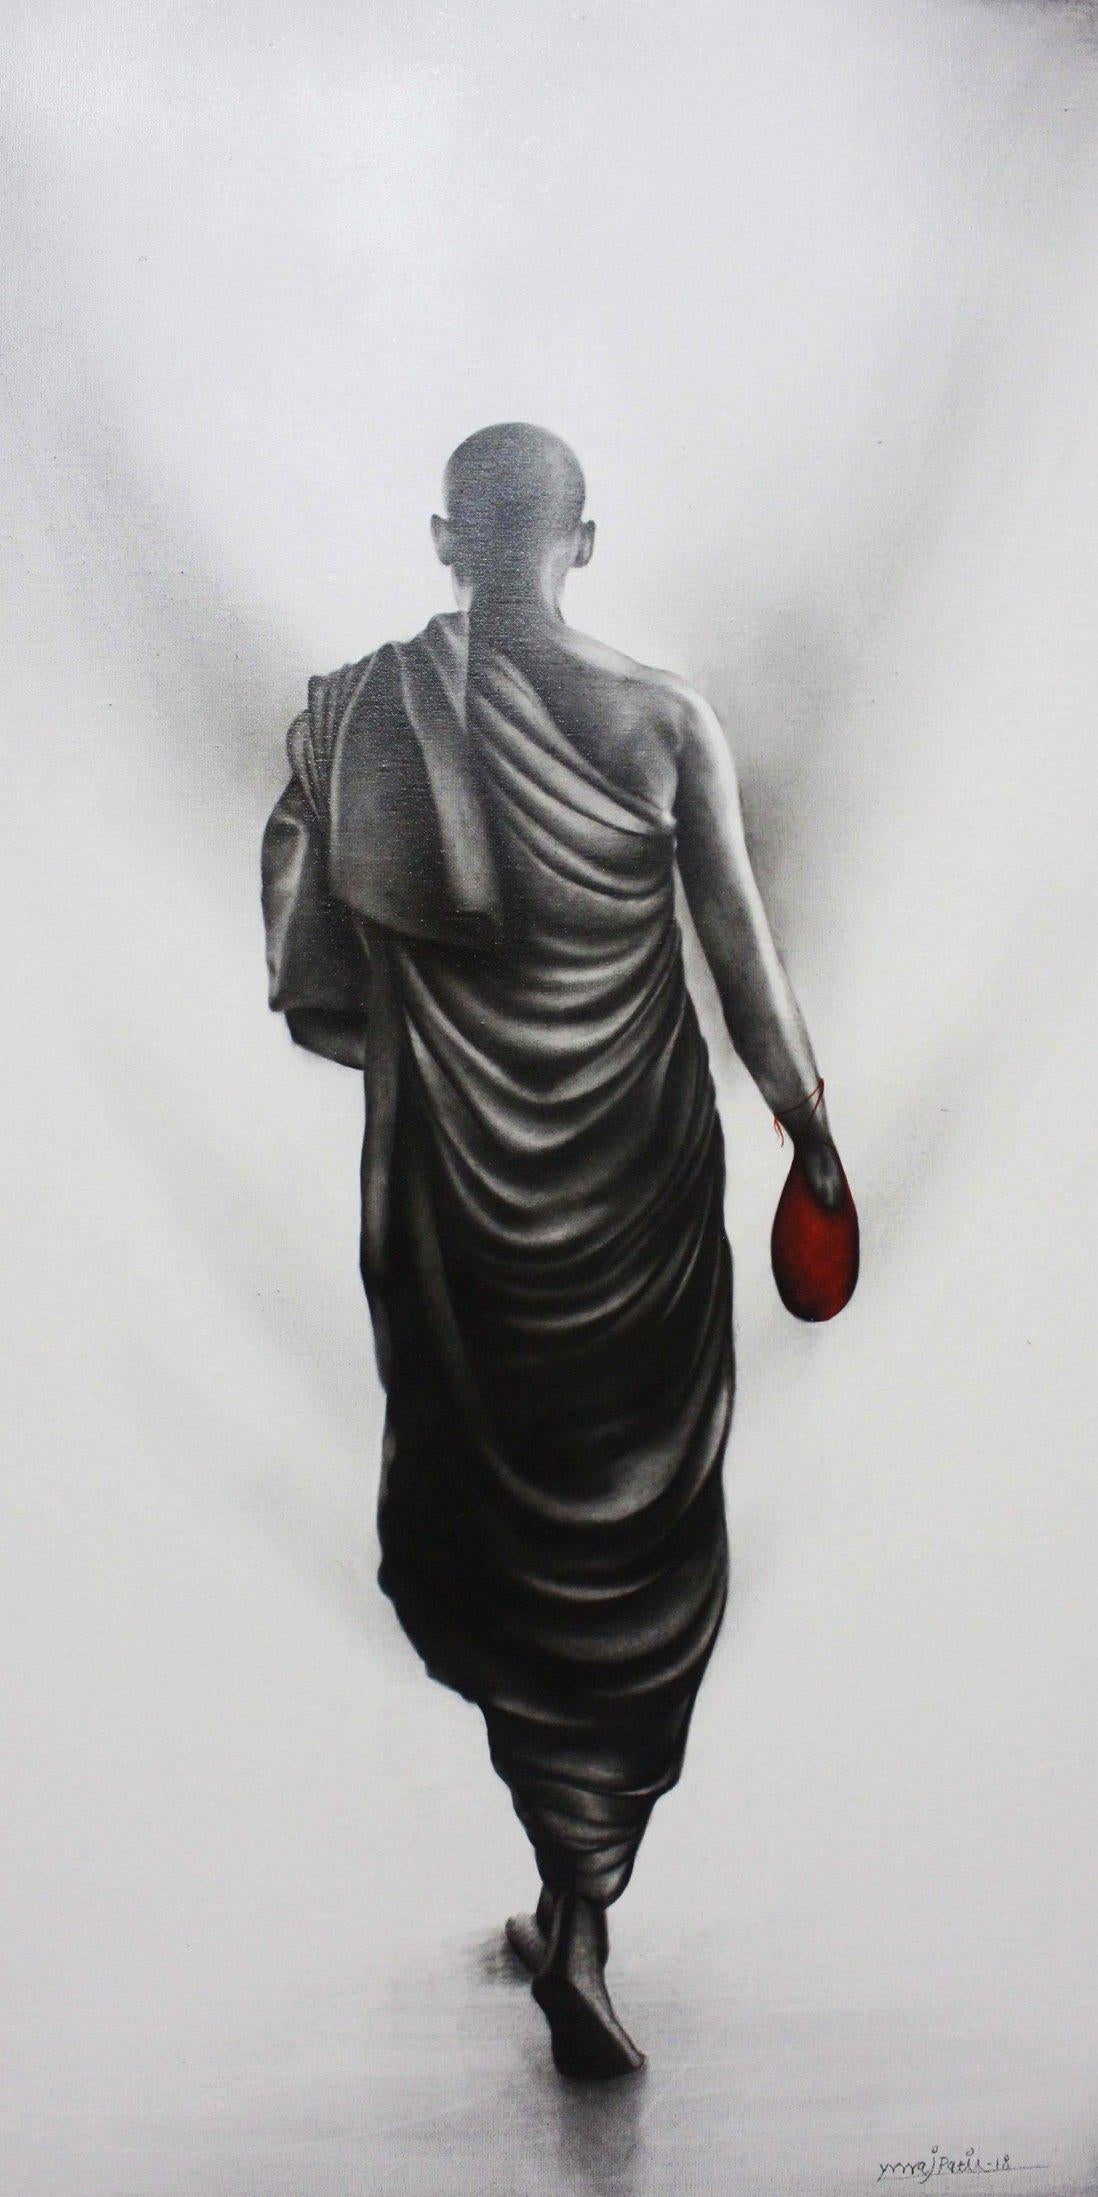 Yuvraj Patil Figurative Painting - Monk, Charcoal on Canvas Black & White colours by Indian Artist "In Stock"